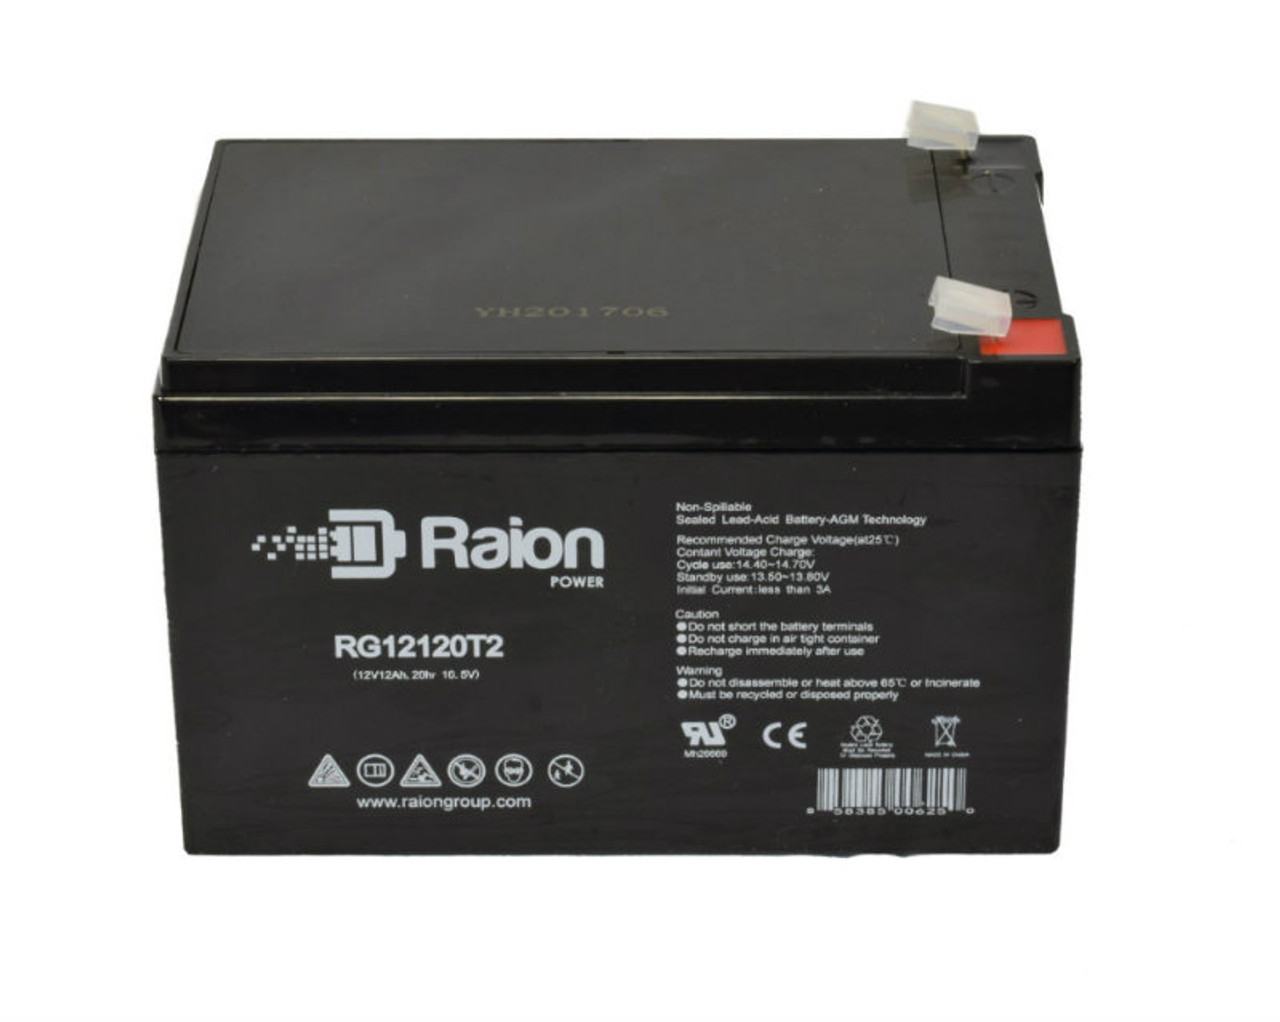 Raion Power RG12120T2 SLA Battery for MAQUET OR Table 1130.01